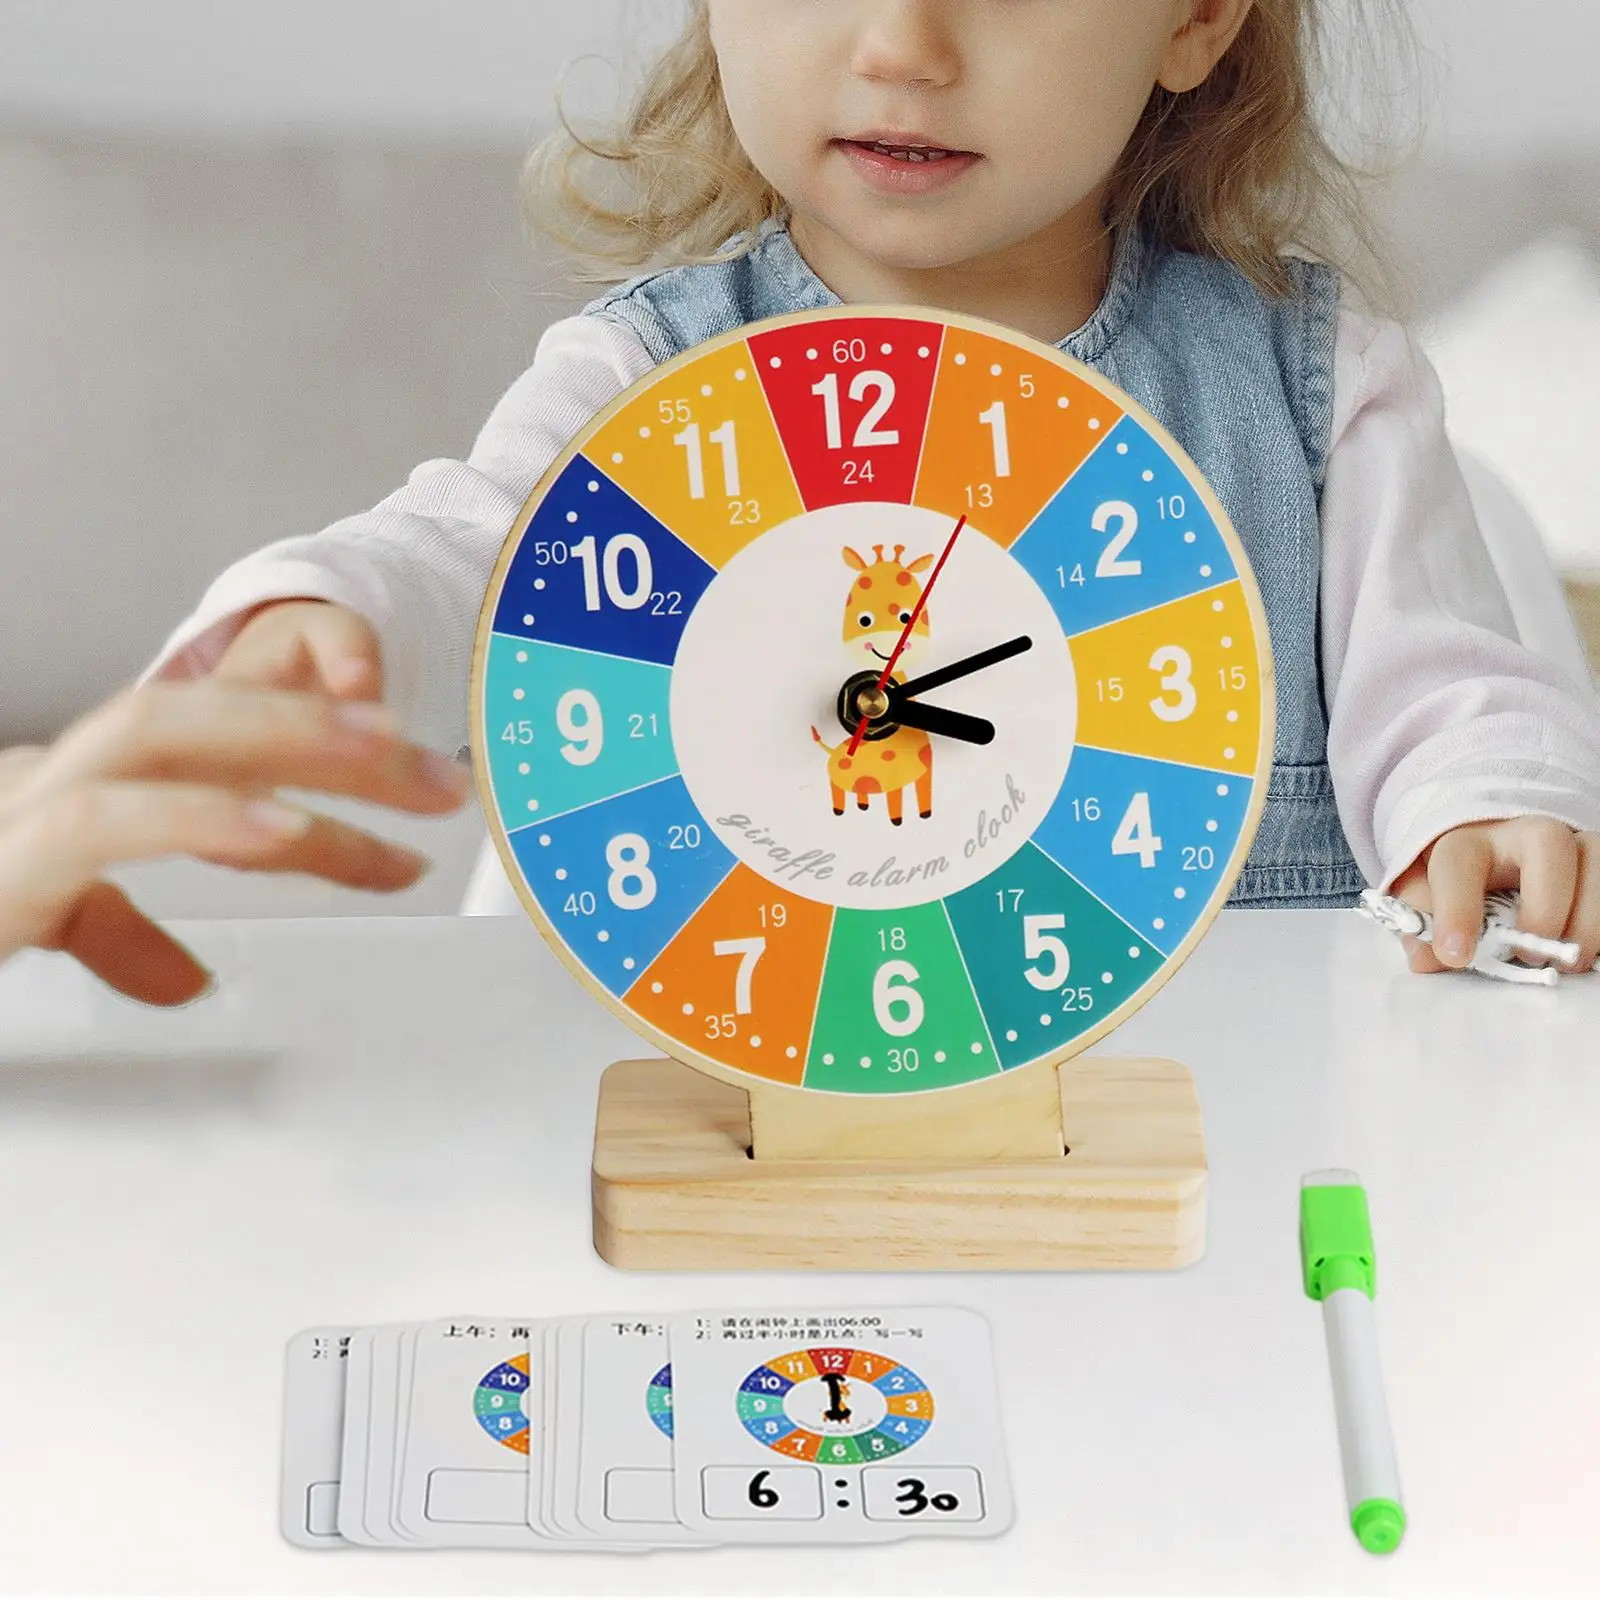 Kids Teaching Clocks Time Activity Montessori Toy for Home School Supplies Learning Activities Kindergartner for 3 4 5 Year Old